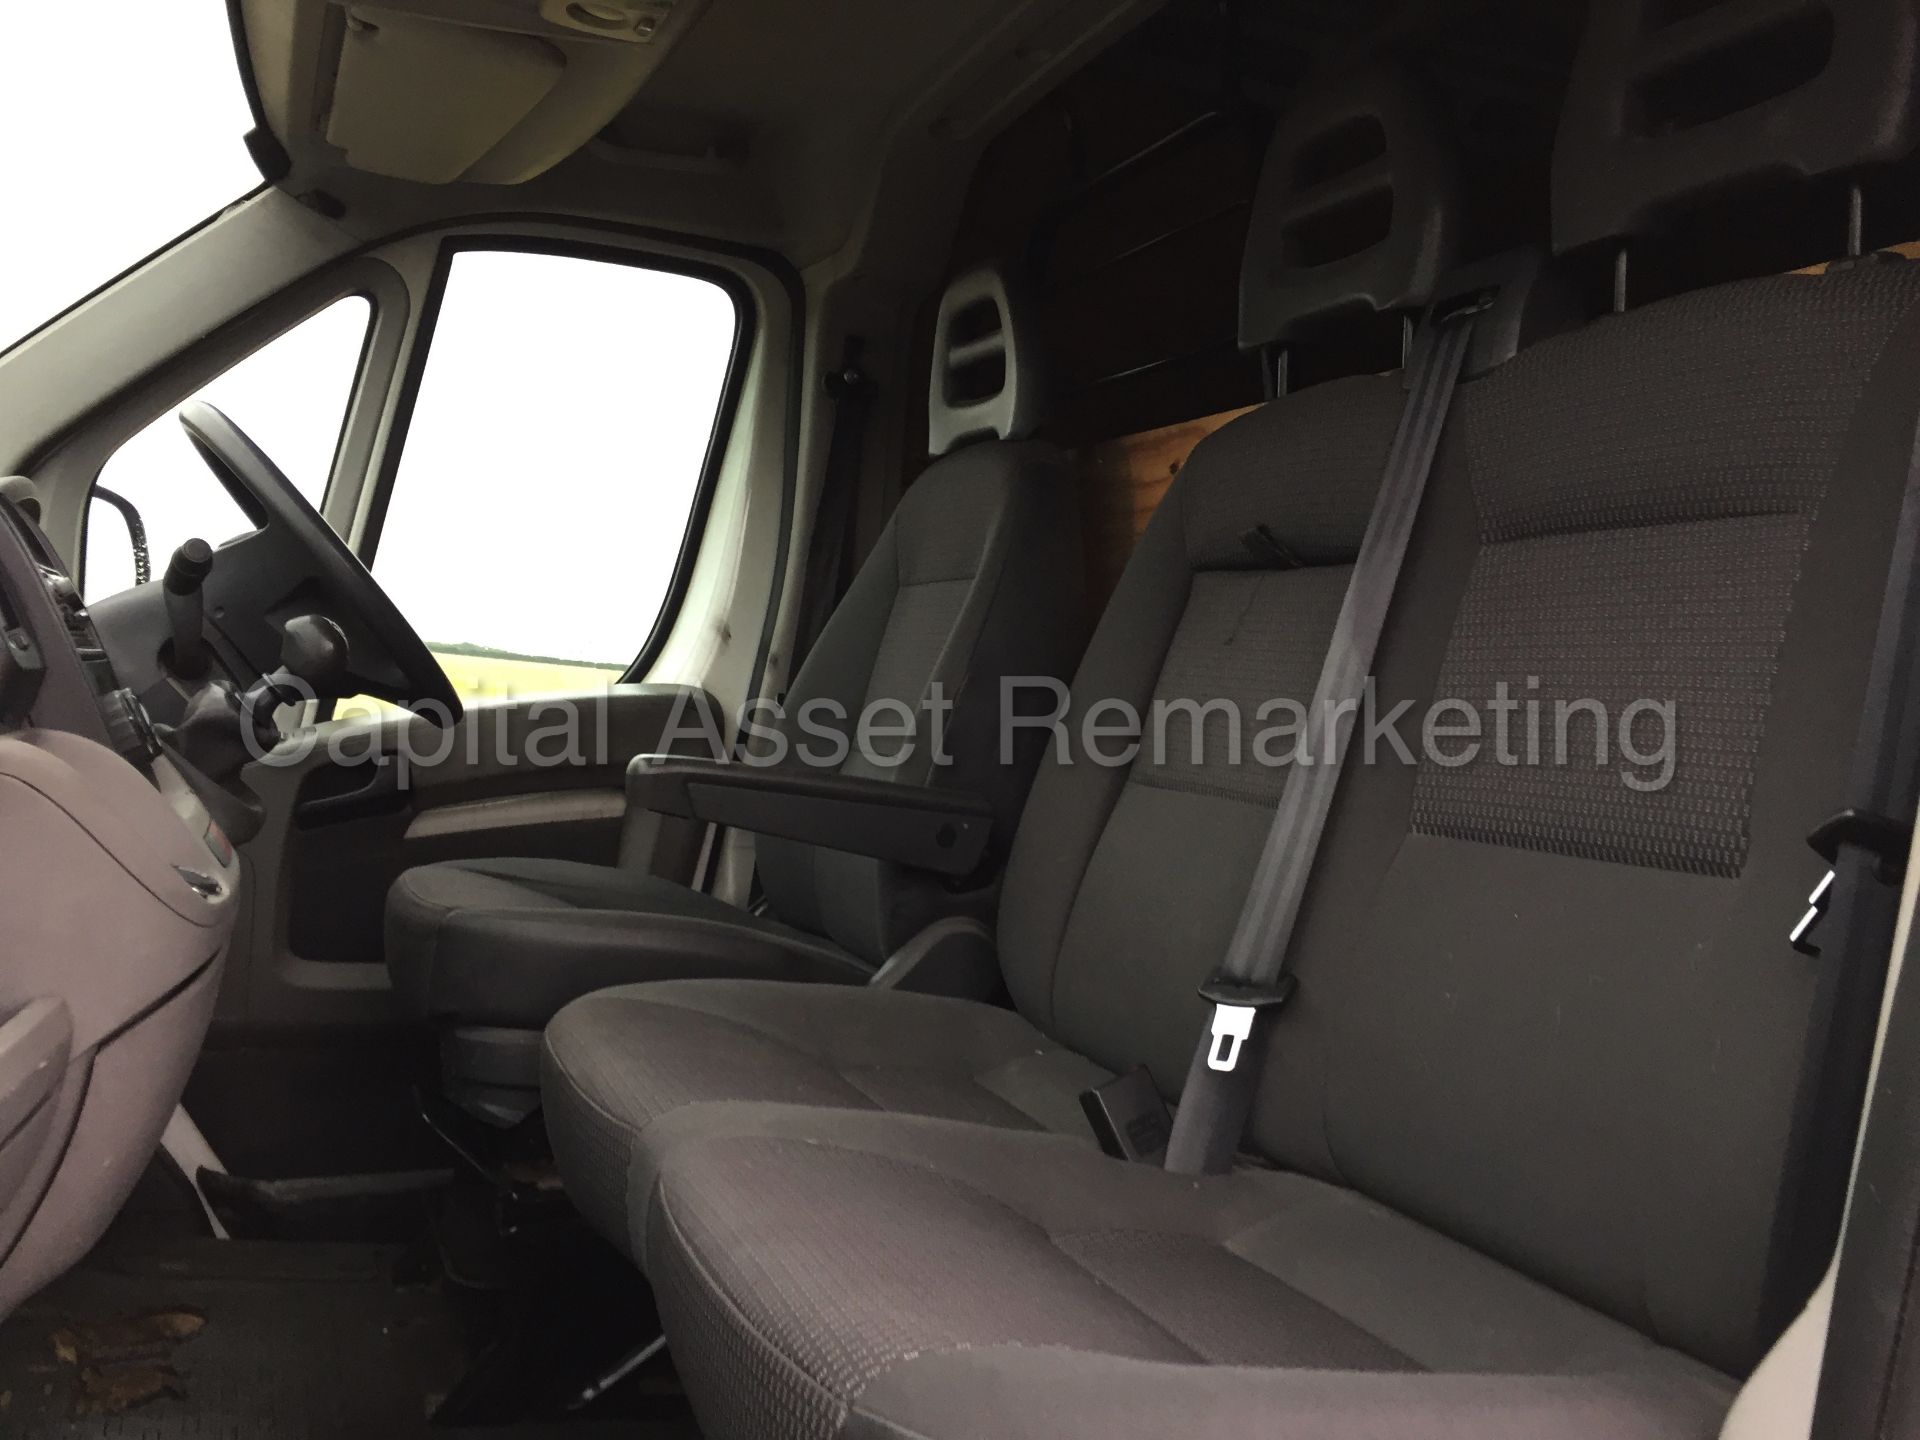 (ON SALE) CITROEN RELAY 35 'LWB HI-ROOF' (2012 MODEL) '2.2 HDI - 120 BHP - 6 SPEED' (1 FORMER OWNER) - Image 13 of 19